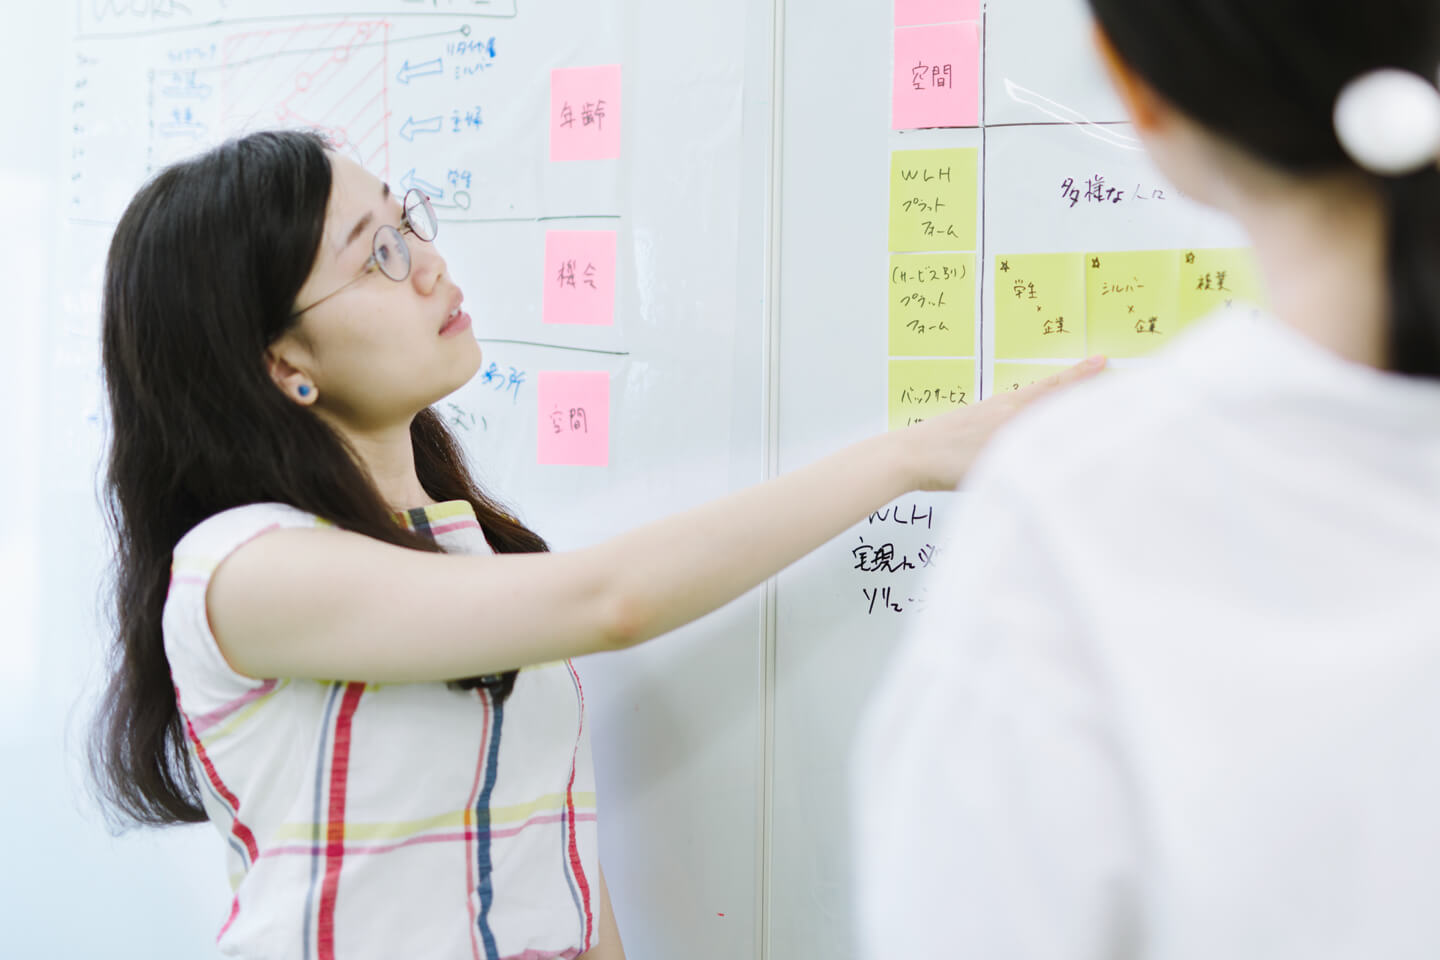 Photograph: Organizing a product’s UX with Post-It Notes